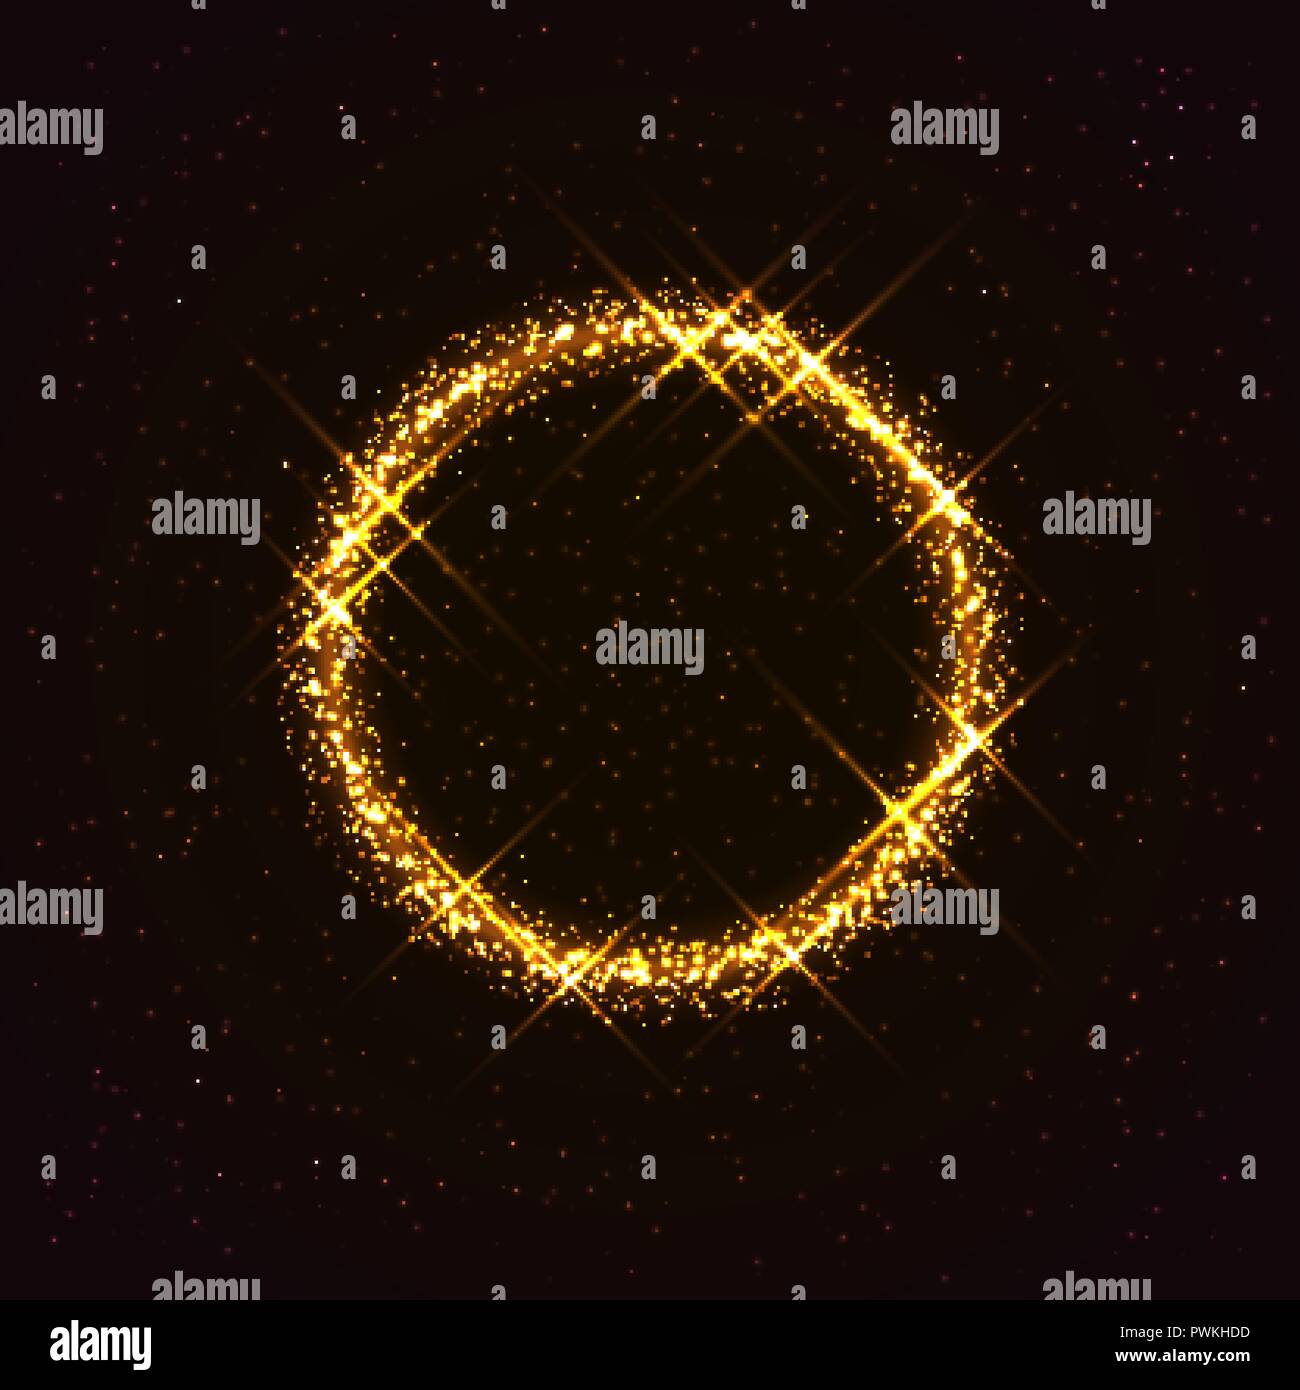 Vector galaxy. Shining golden ring made of stars. Beautiful abstract cosmic background. Bright yellow circle. Creative cosmic space illustration. Stock Vector